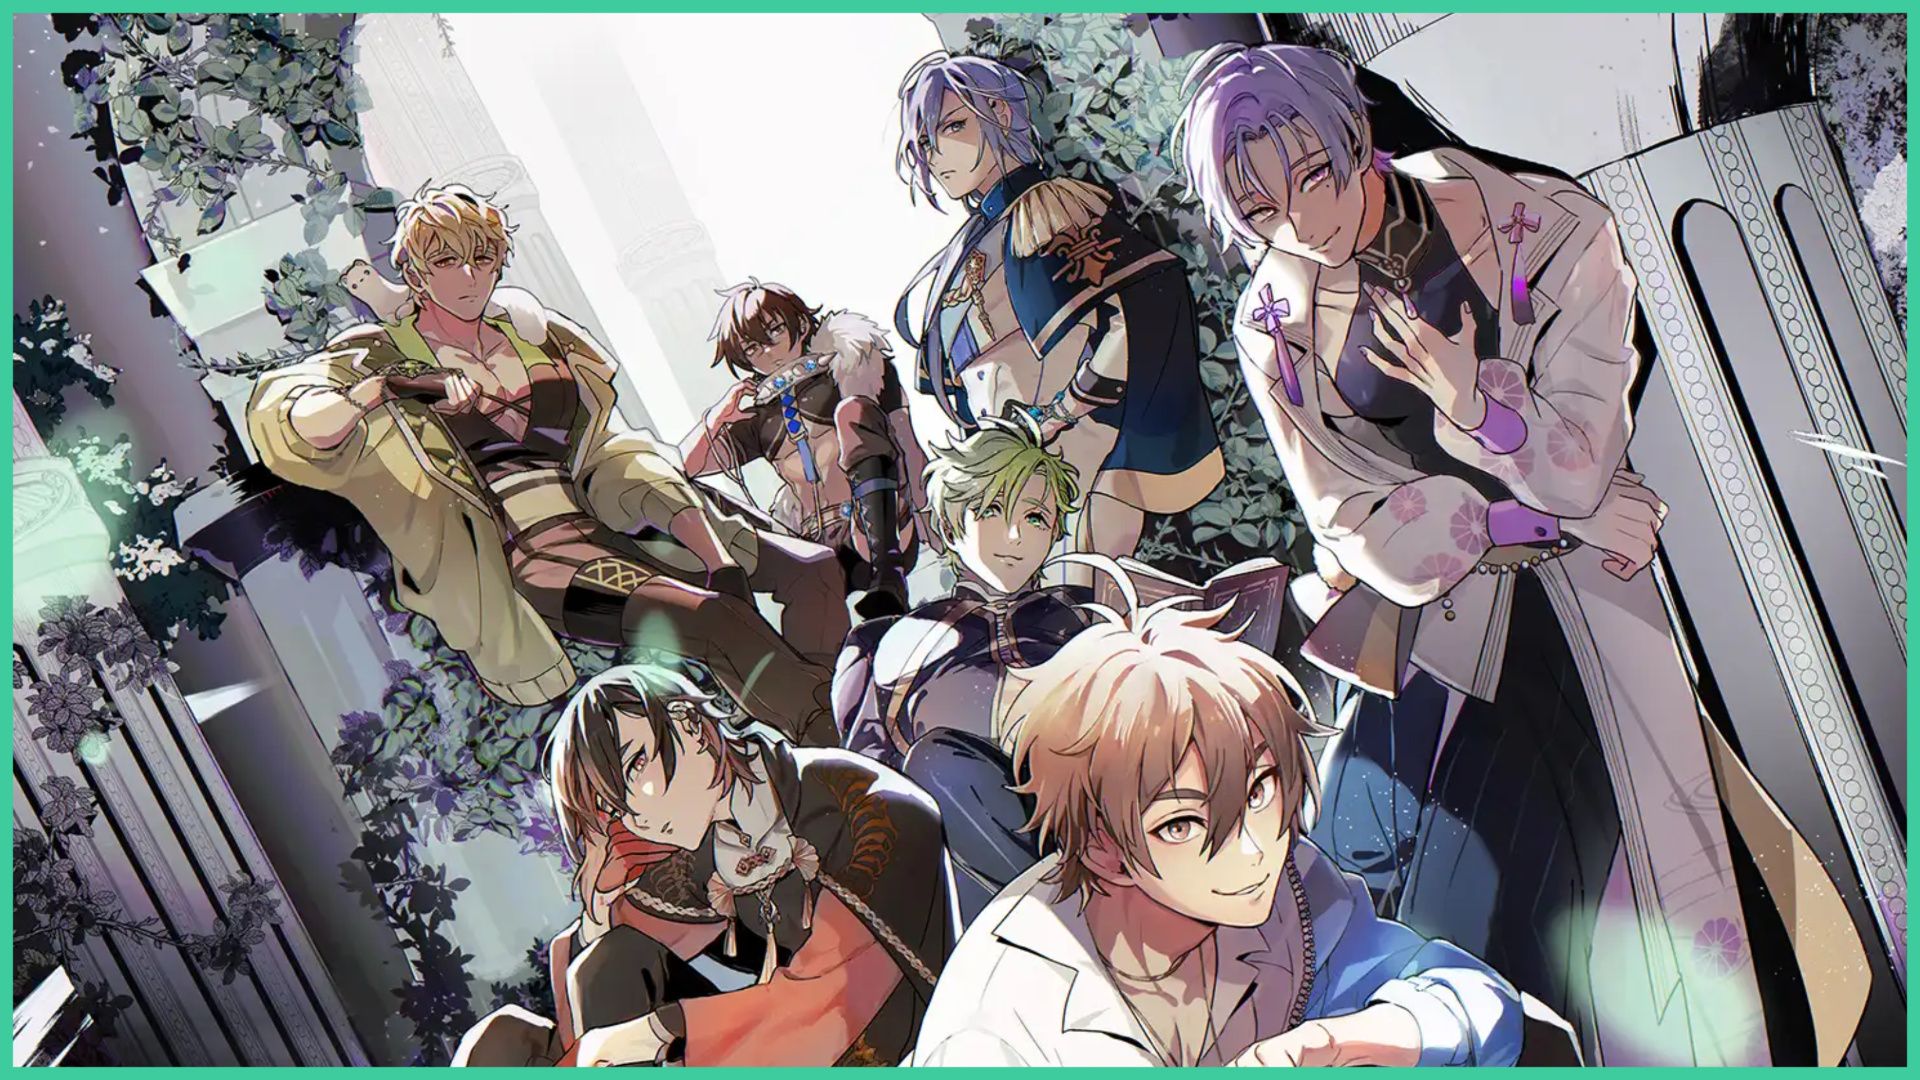 feature image for our nu carnival tier list, the image features promo art of the full roster of male characters as they sit around, with some of the characters standing against pillars and the walls that are adorned with leaves as the sun shines through the archway, some of the men are smiling while others have a stern look on their faces